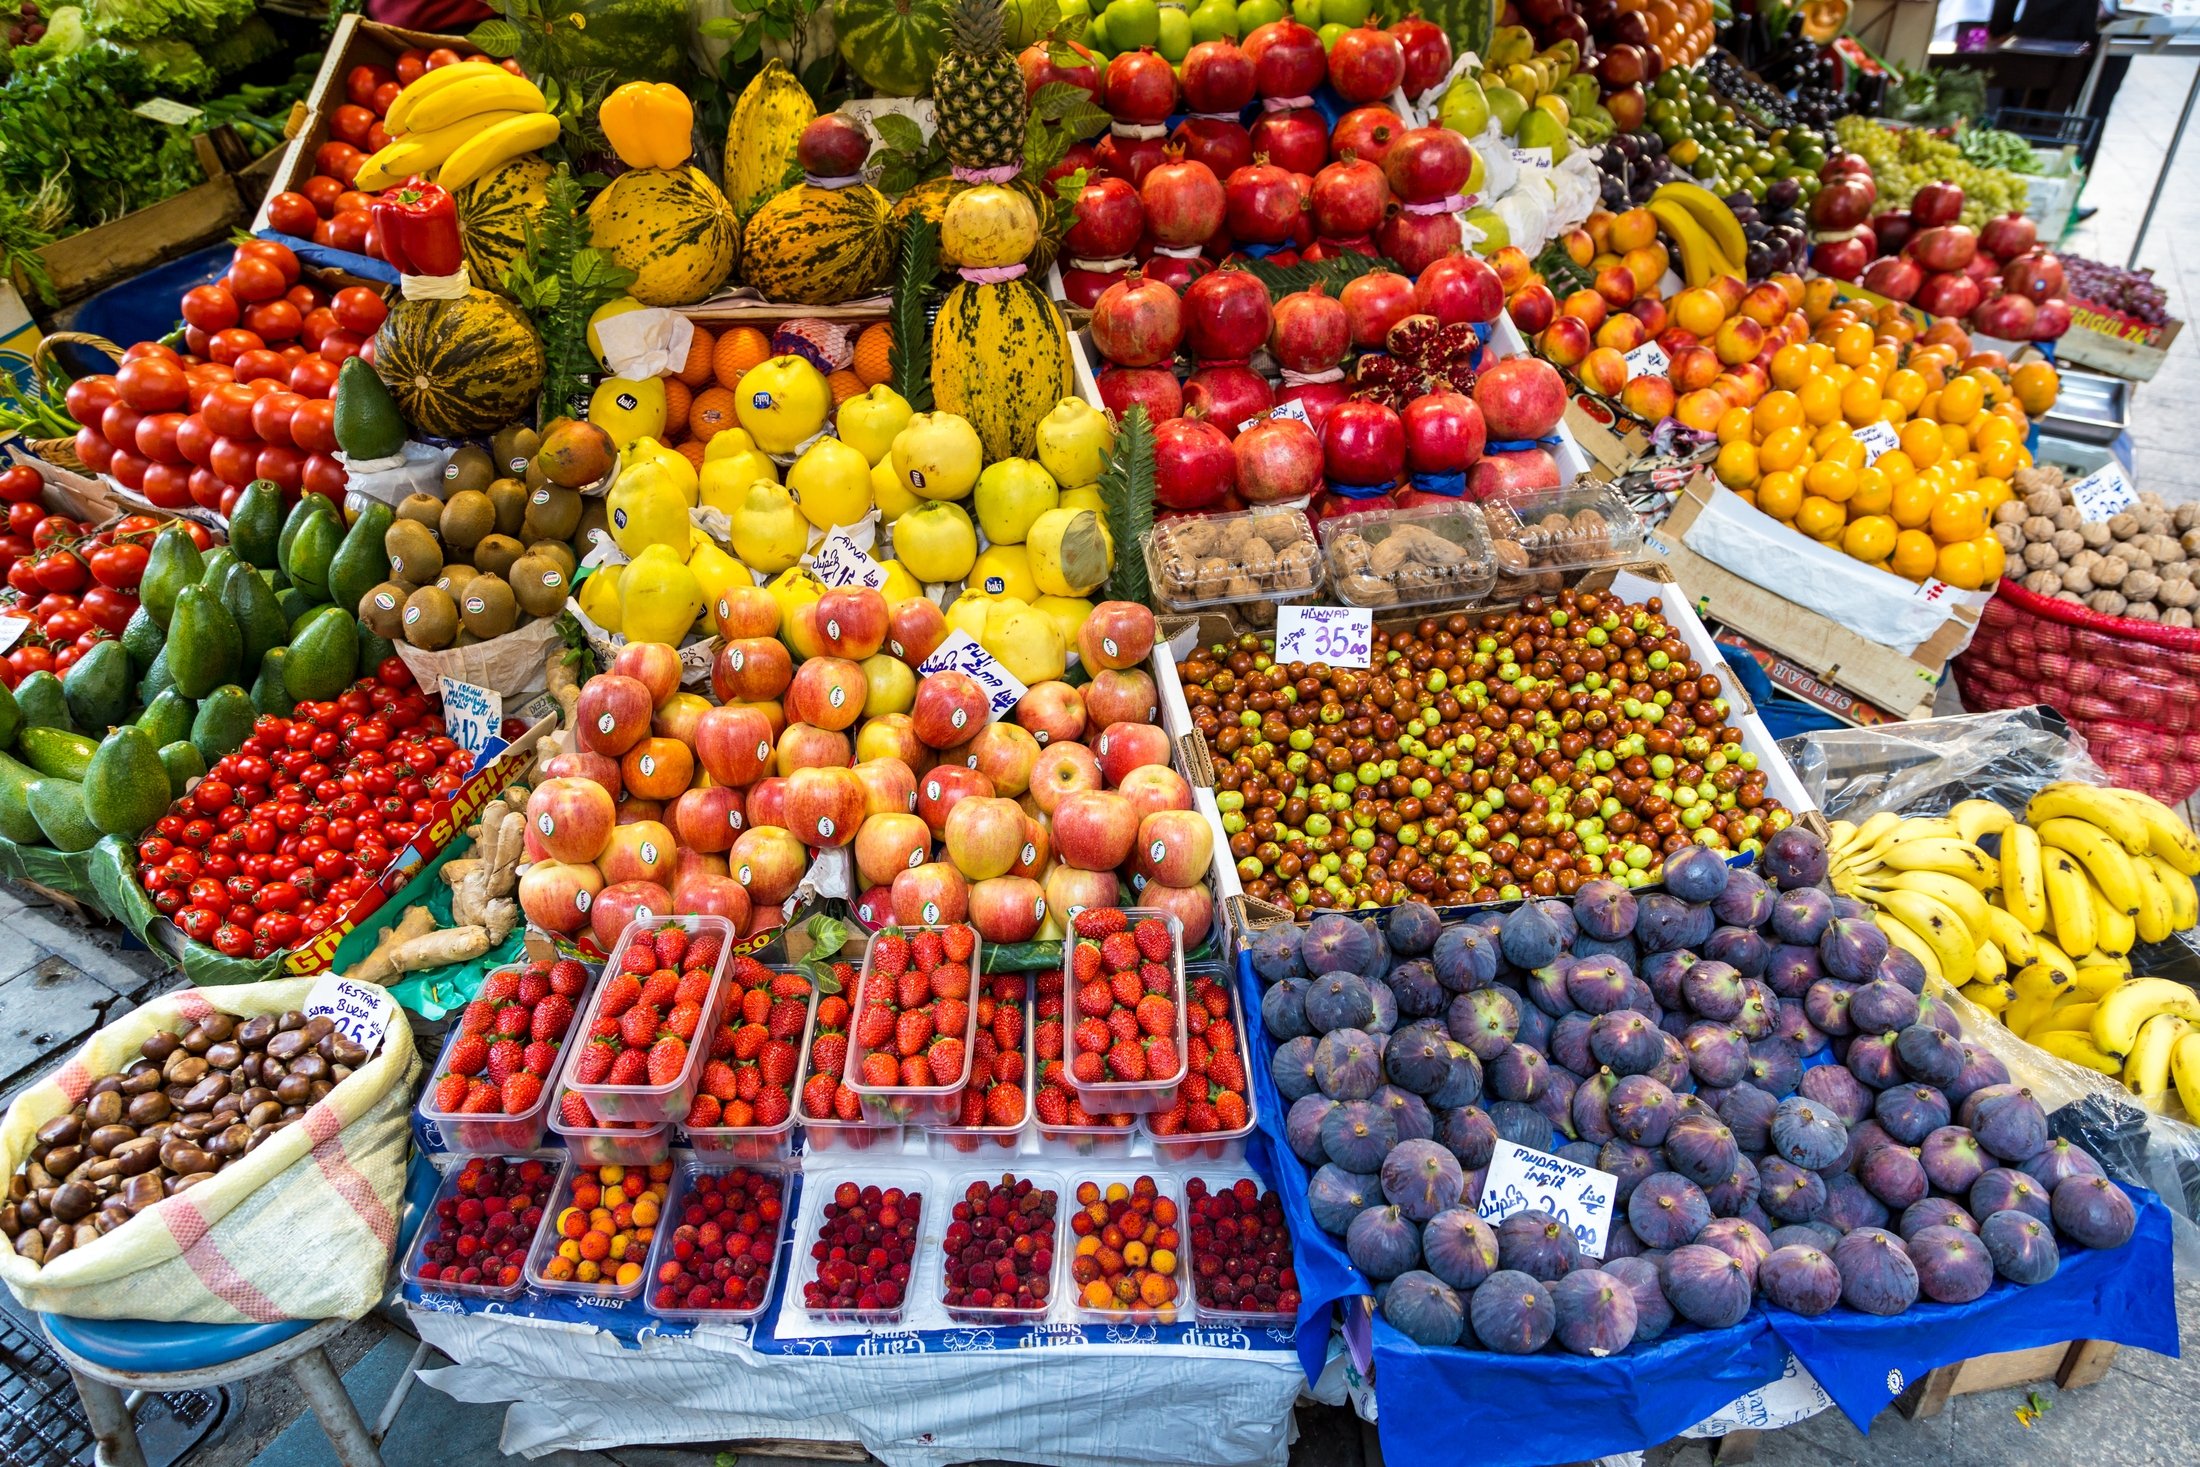 A traditional street market, or bazaar, with fresh fruits and vegetables, in Istanbul, Türkiye, Oct. 20, 2014. (Shutterstock Photo)